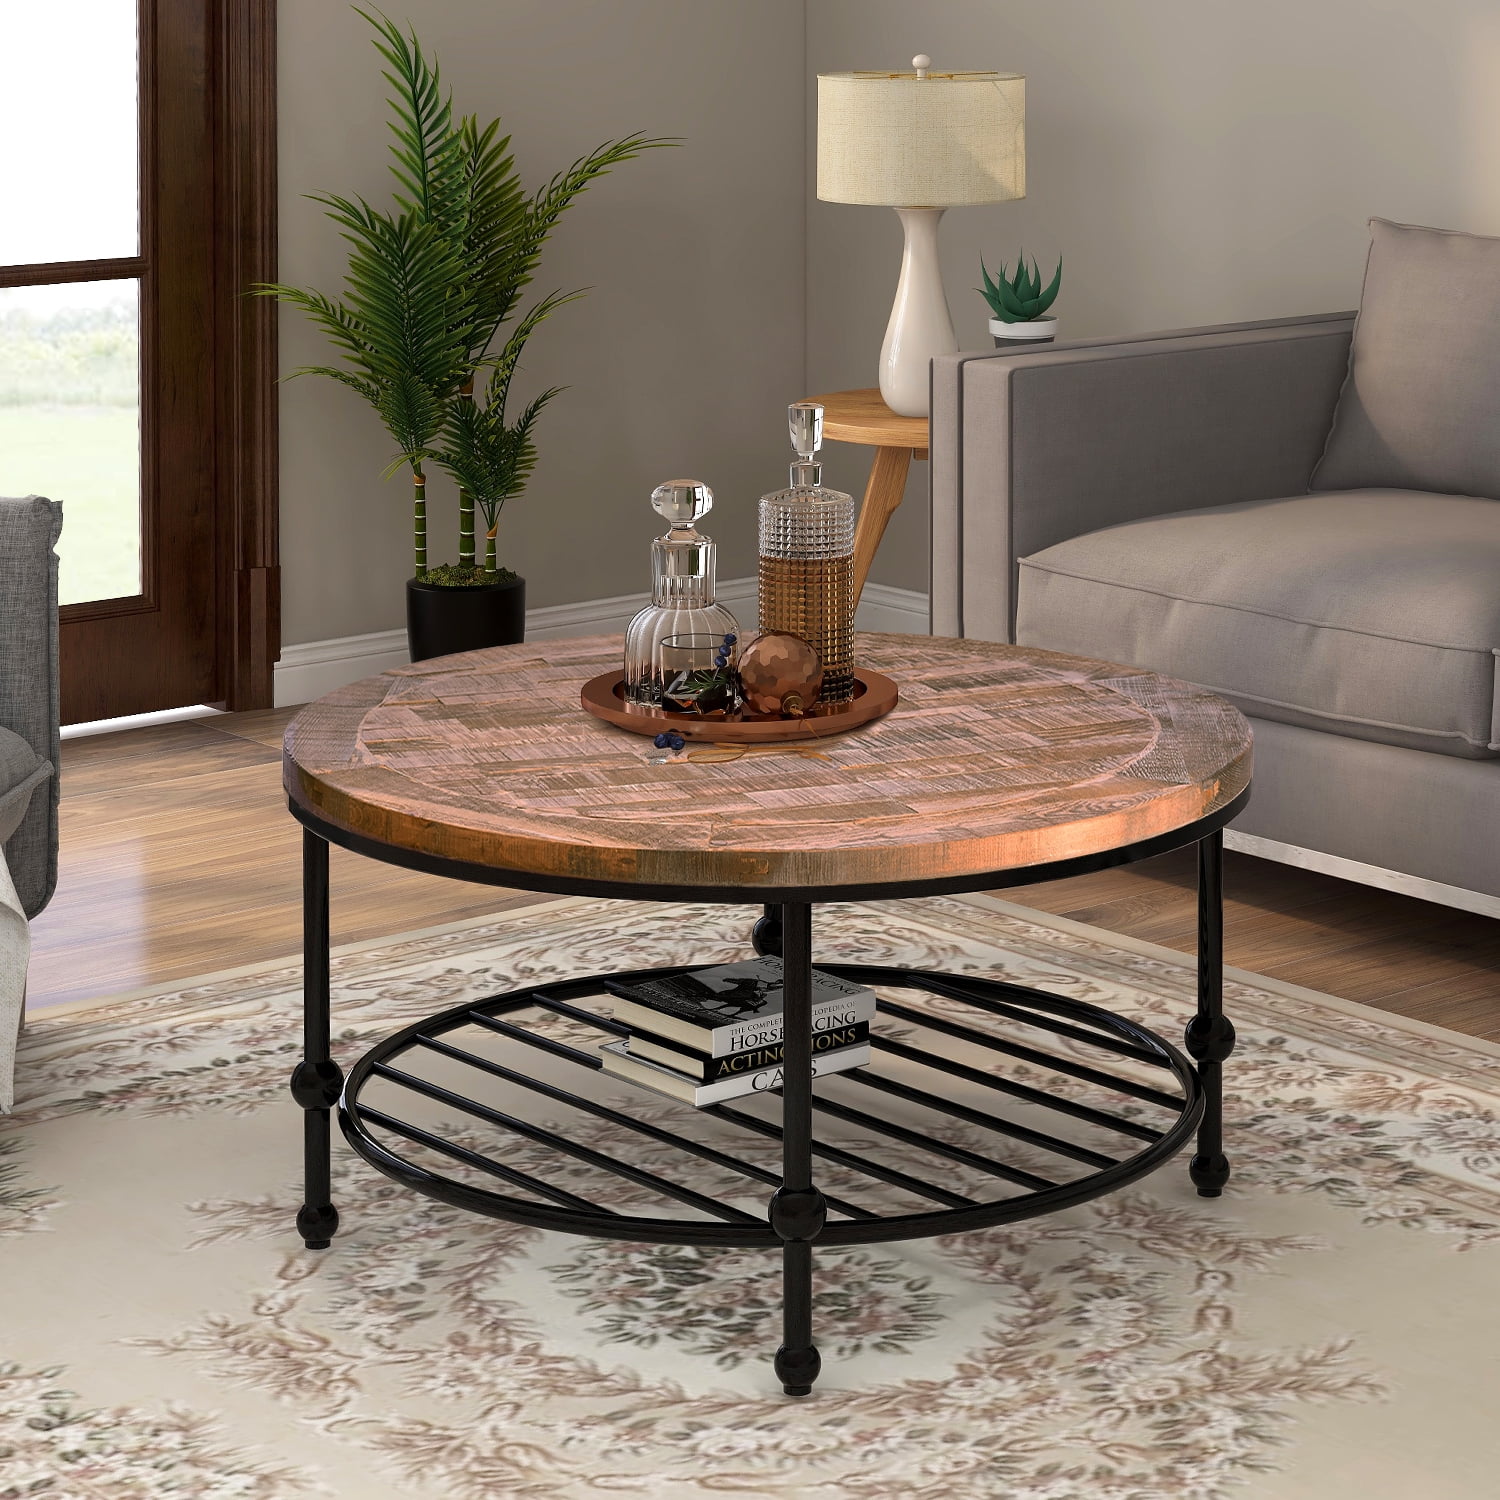 Home Rustic Natural Round Coffee Table, Rustic Round Coffee Table With Storage